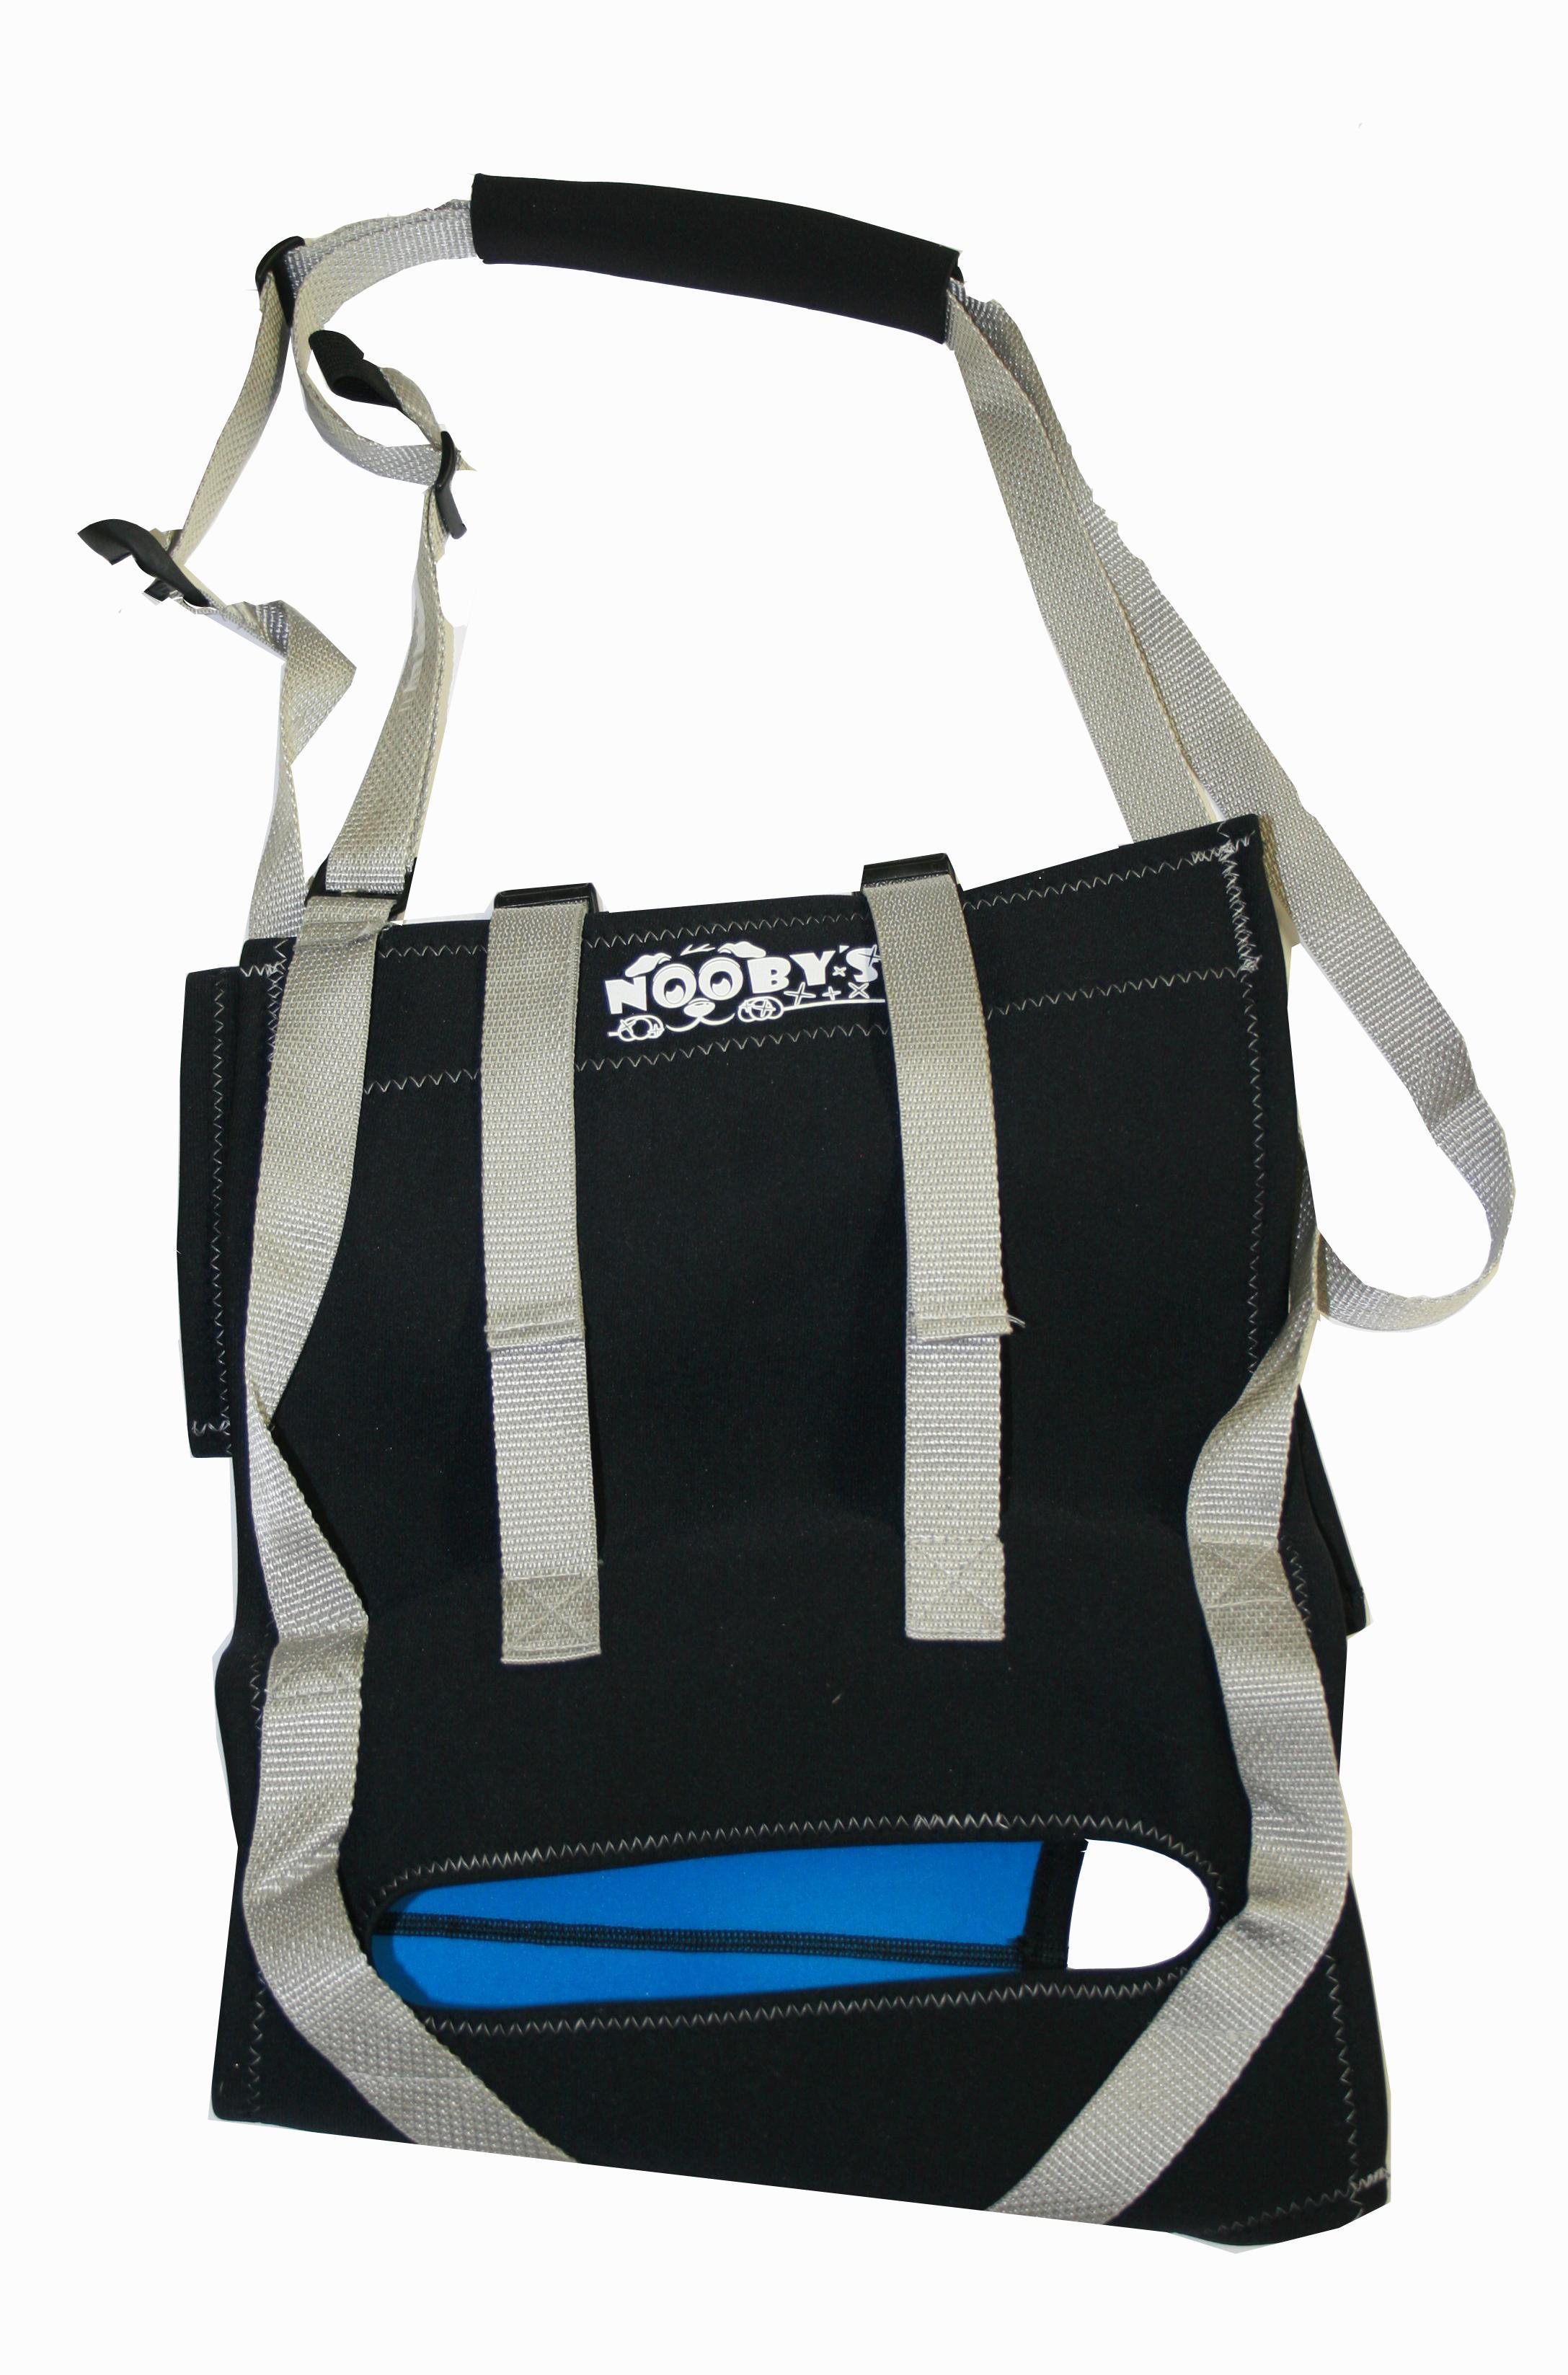 Nooby's FRONT Mobility Support Harness